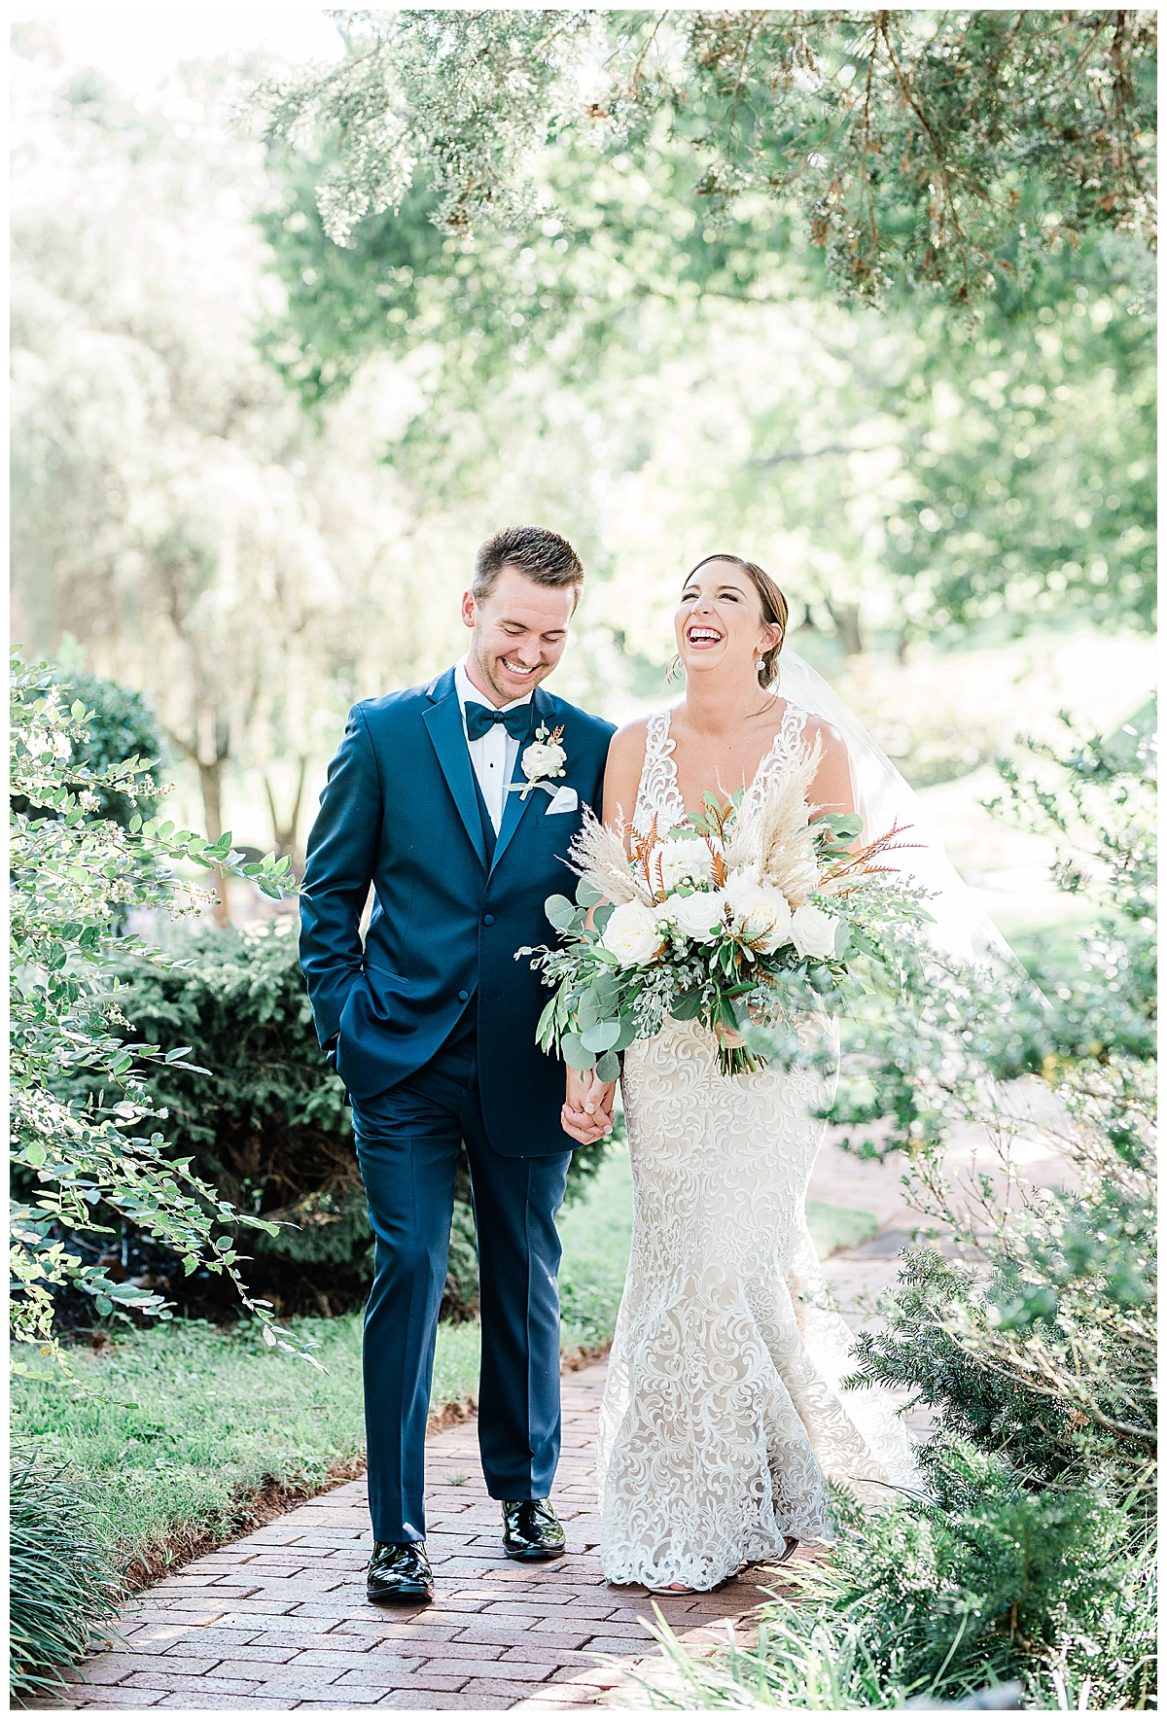 Virginia Wedding Photographer; Best of Weddings & Engagements 2021; Brooke Danielle Photography; The Inn at Willow Grove;